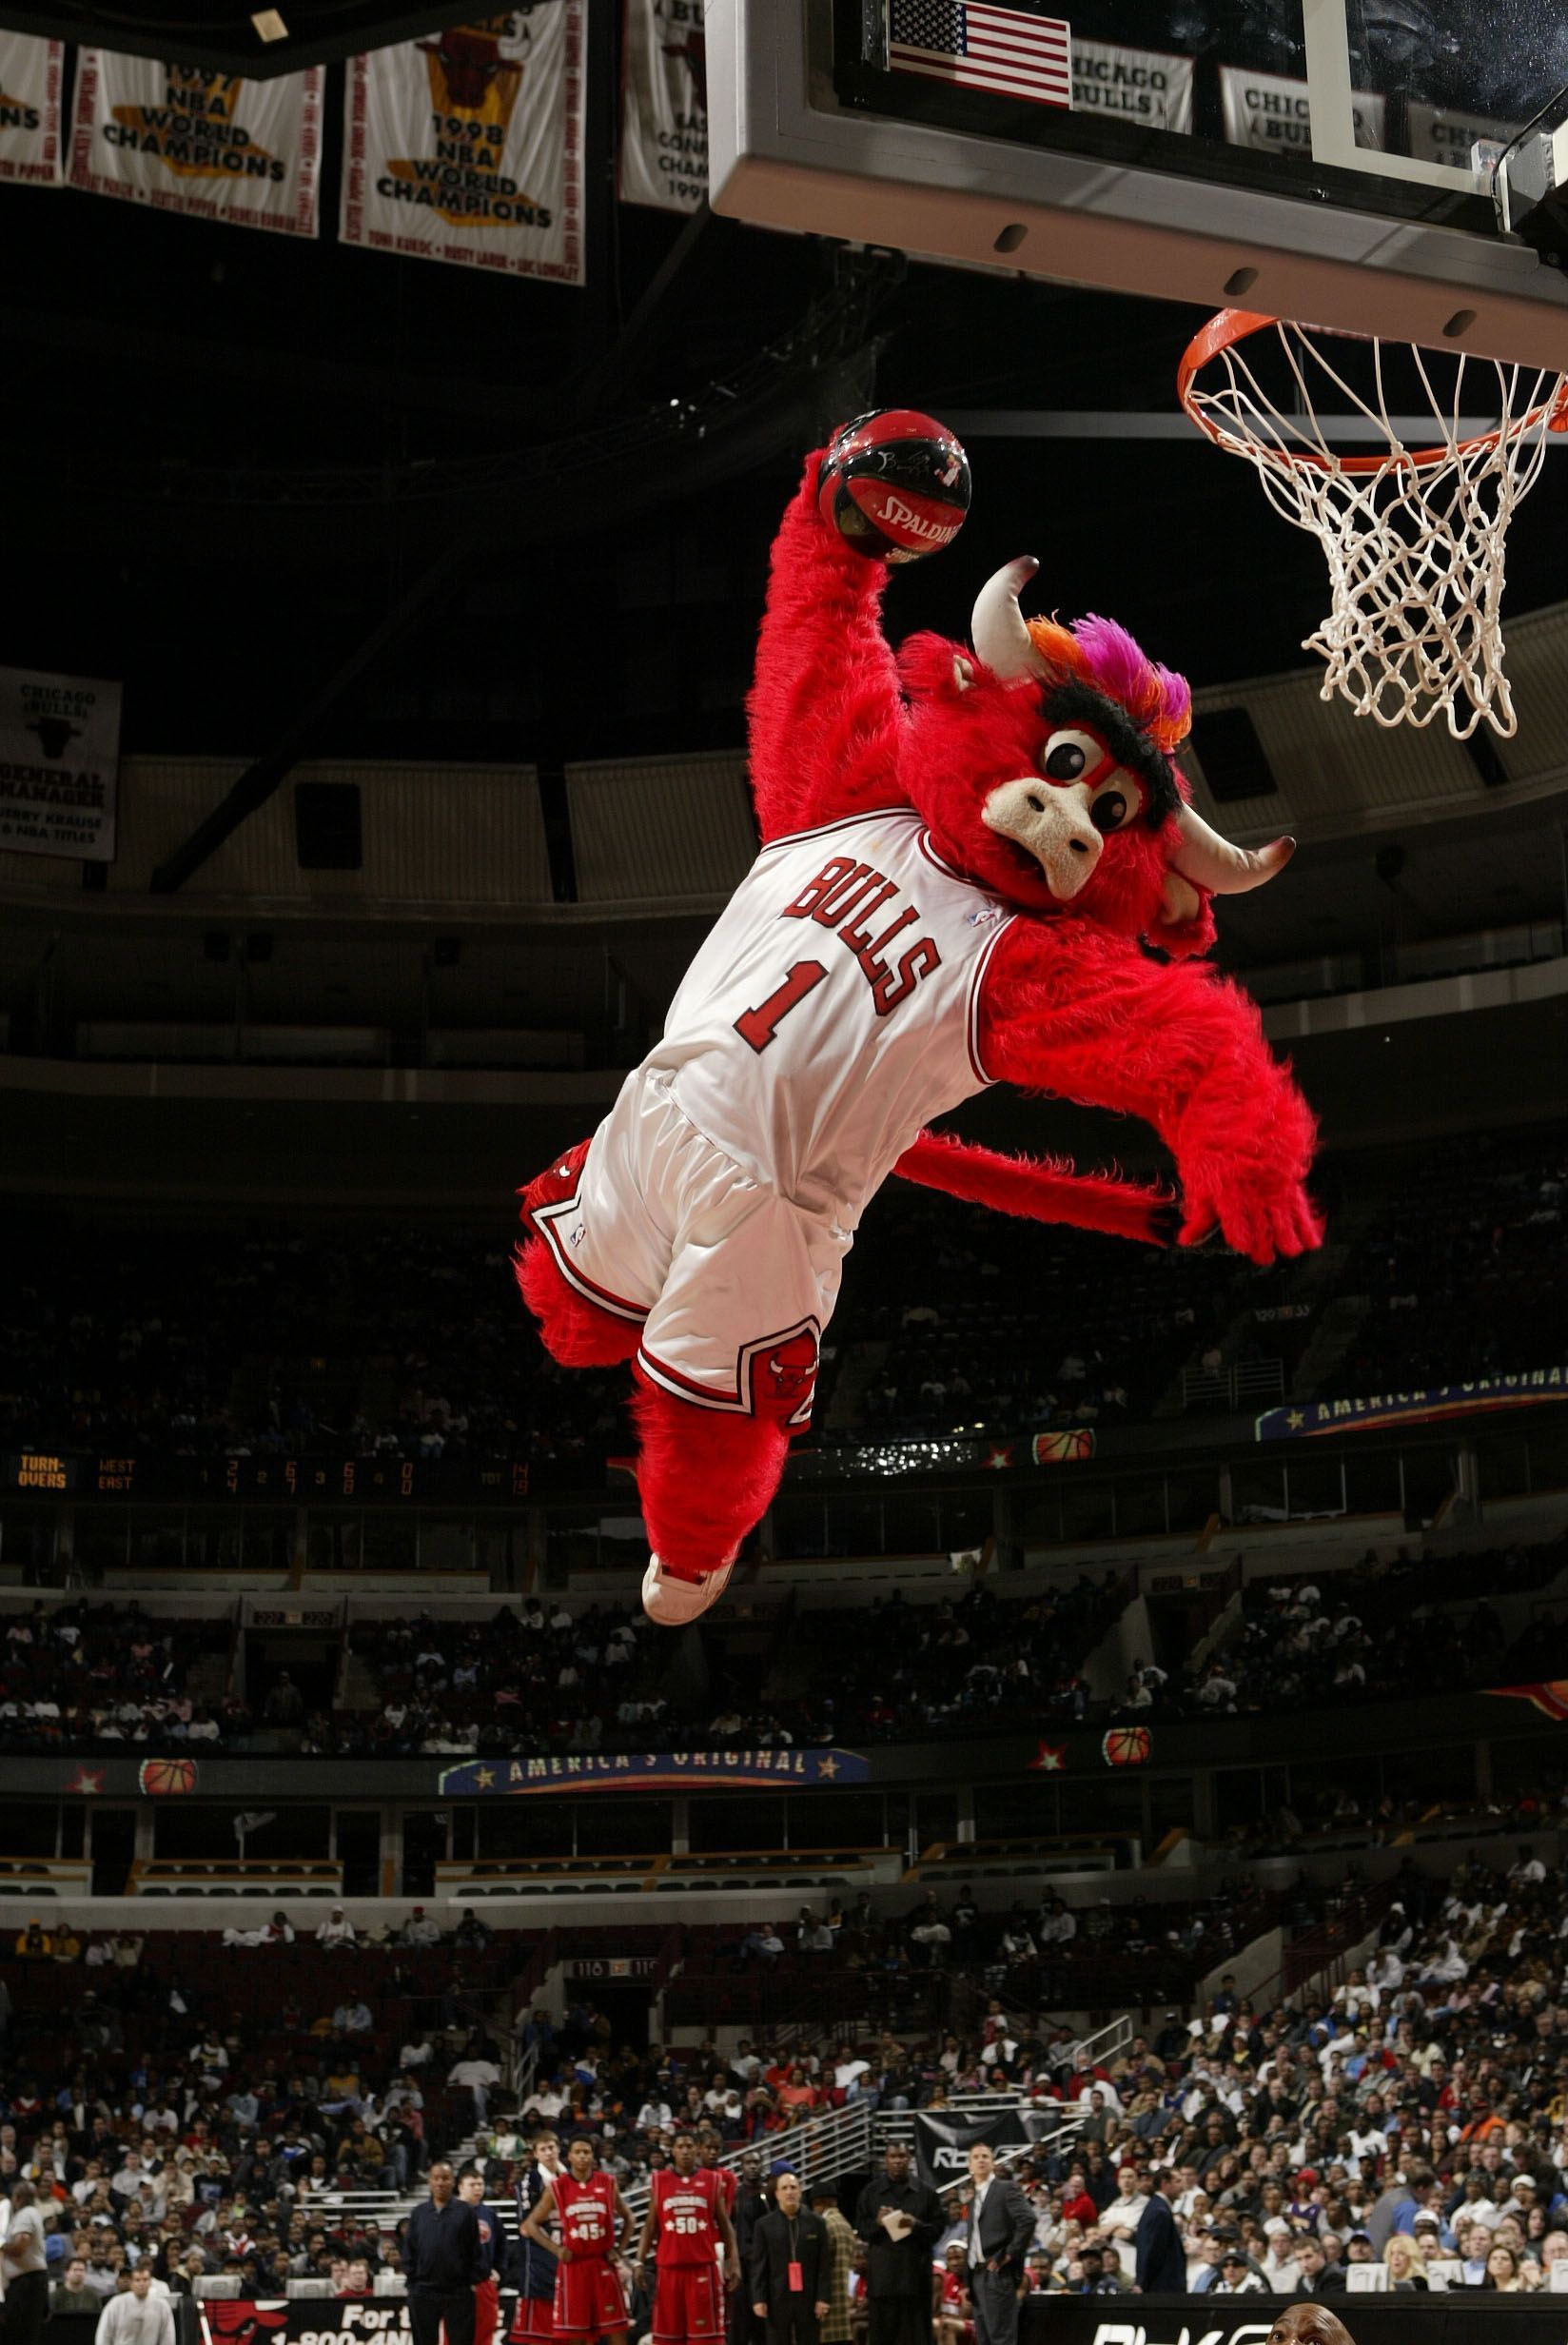 Benny the Bull Background